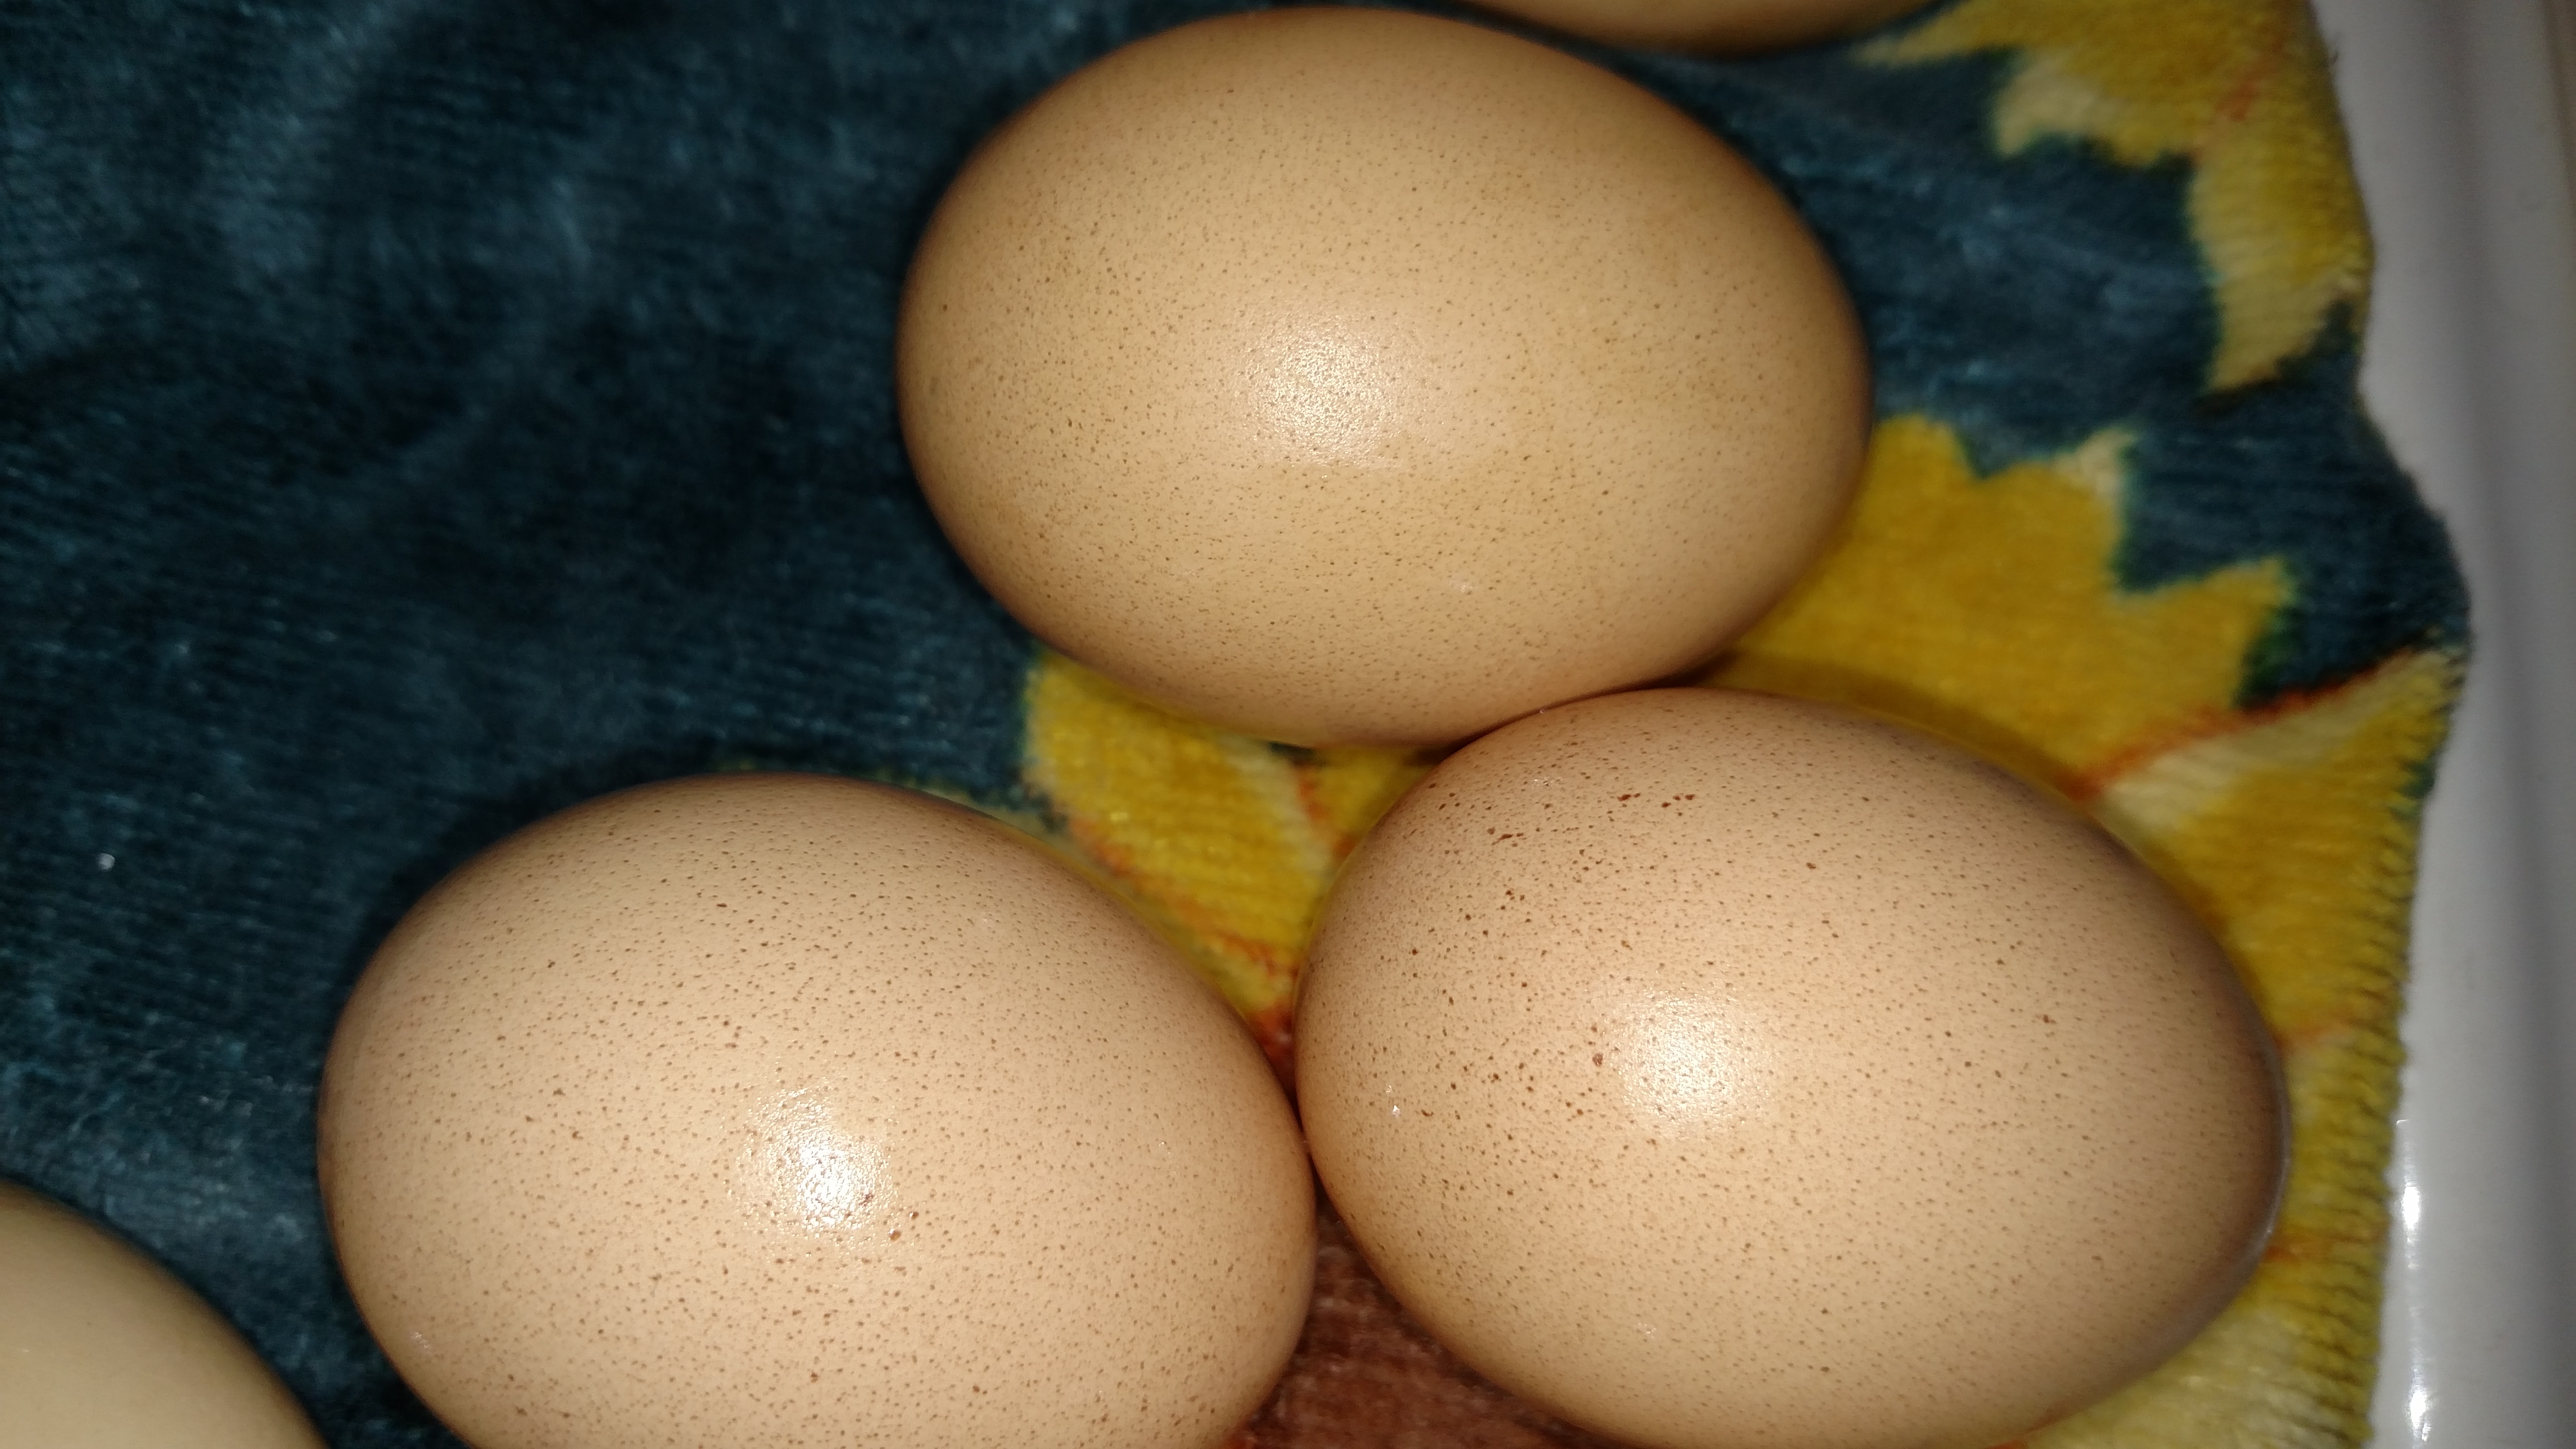 After close inspection, noticed that some of the large eggs I collect from pig pen flock are speckled.  Haven't look under magnifying glass yet, but specs appear red.